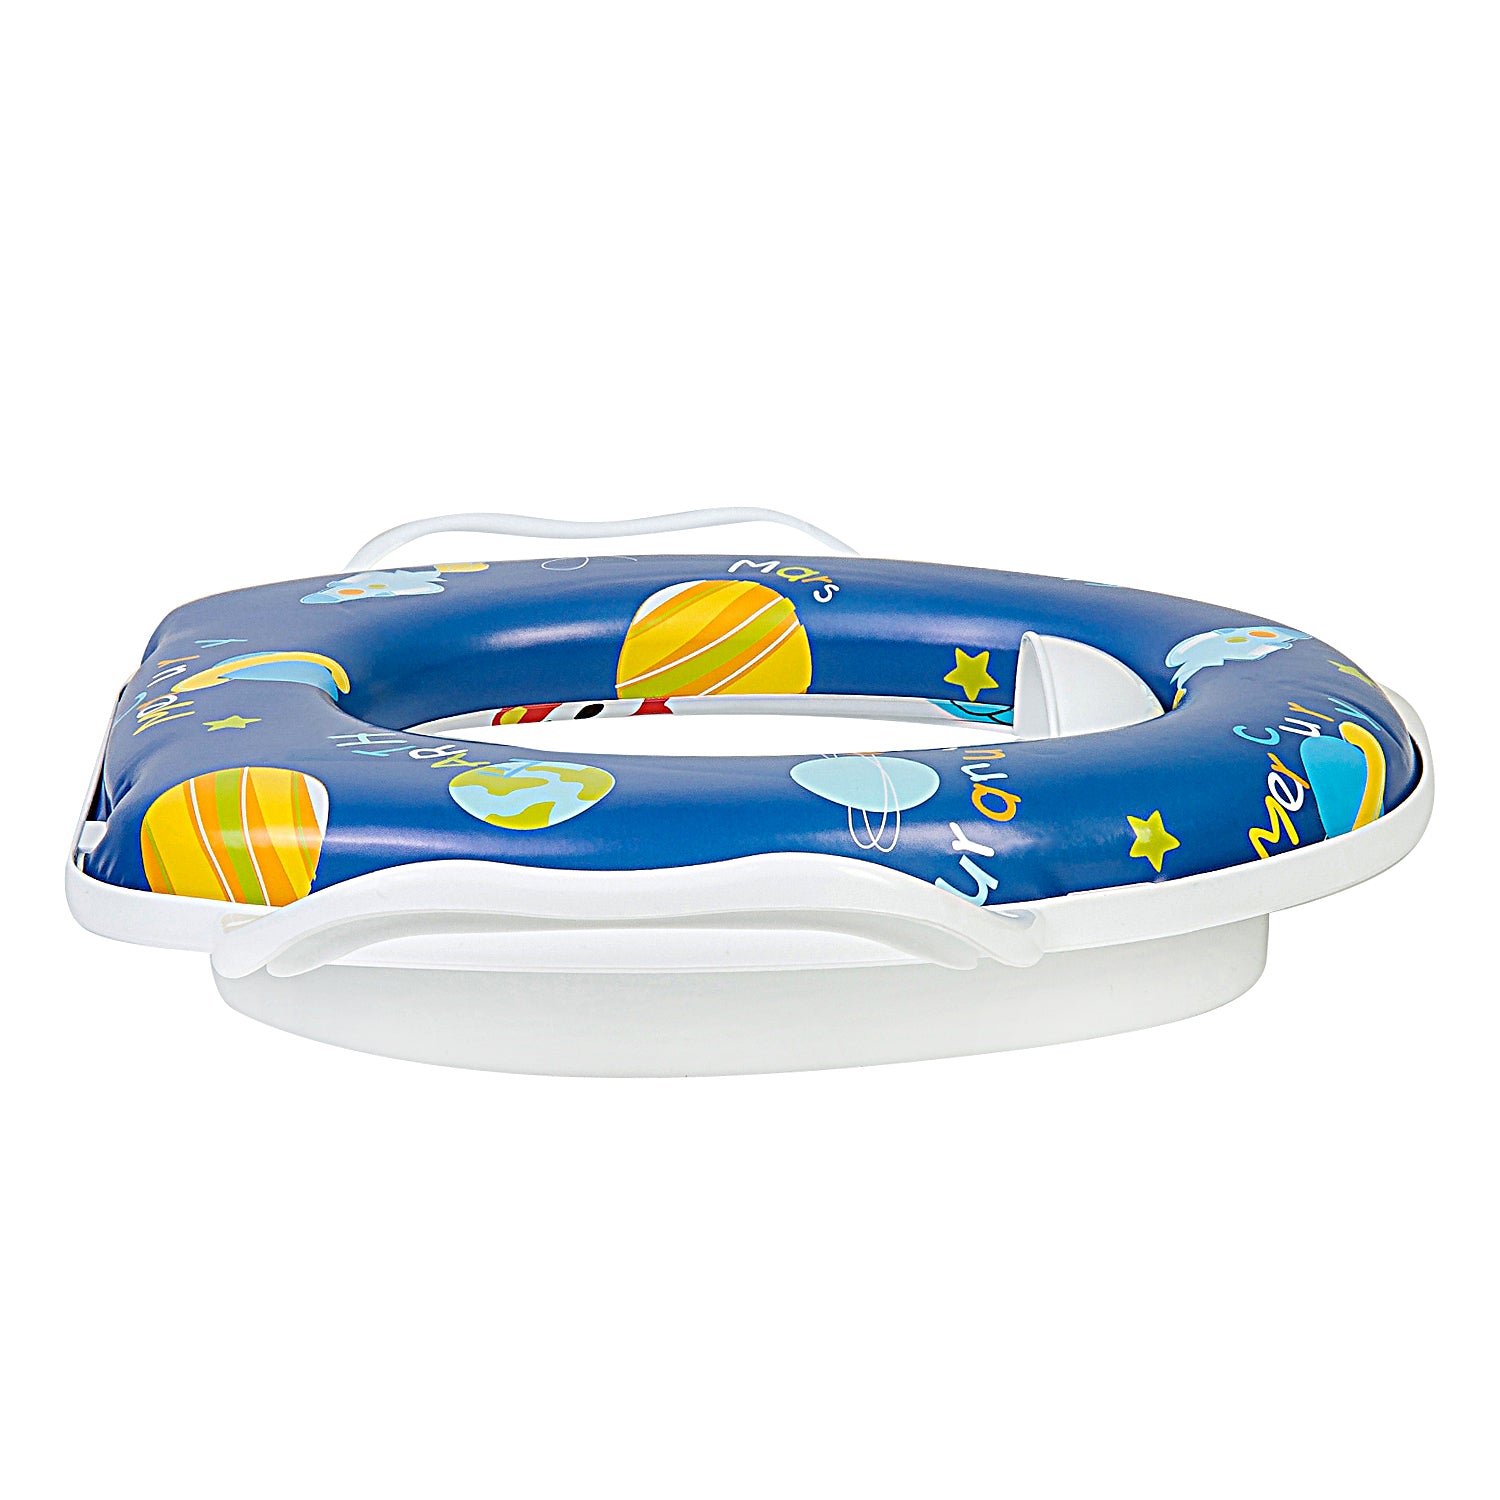 Baby Moo Space Blue Potty Seat With Handle